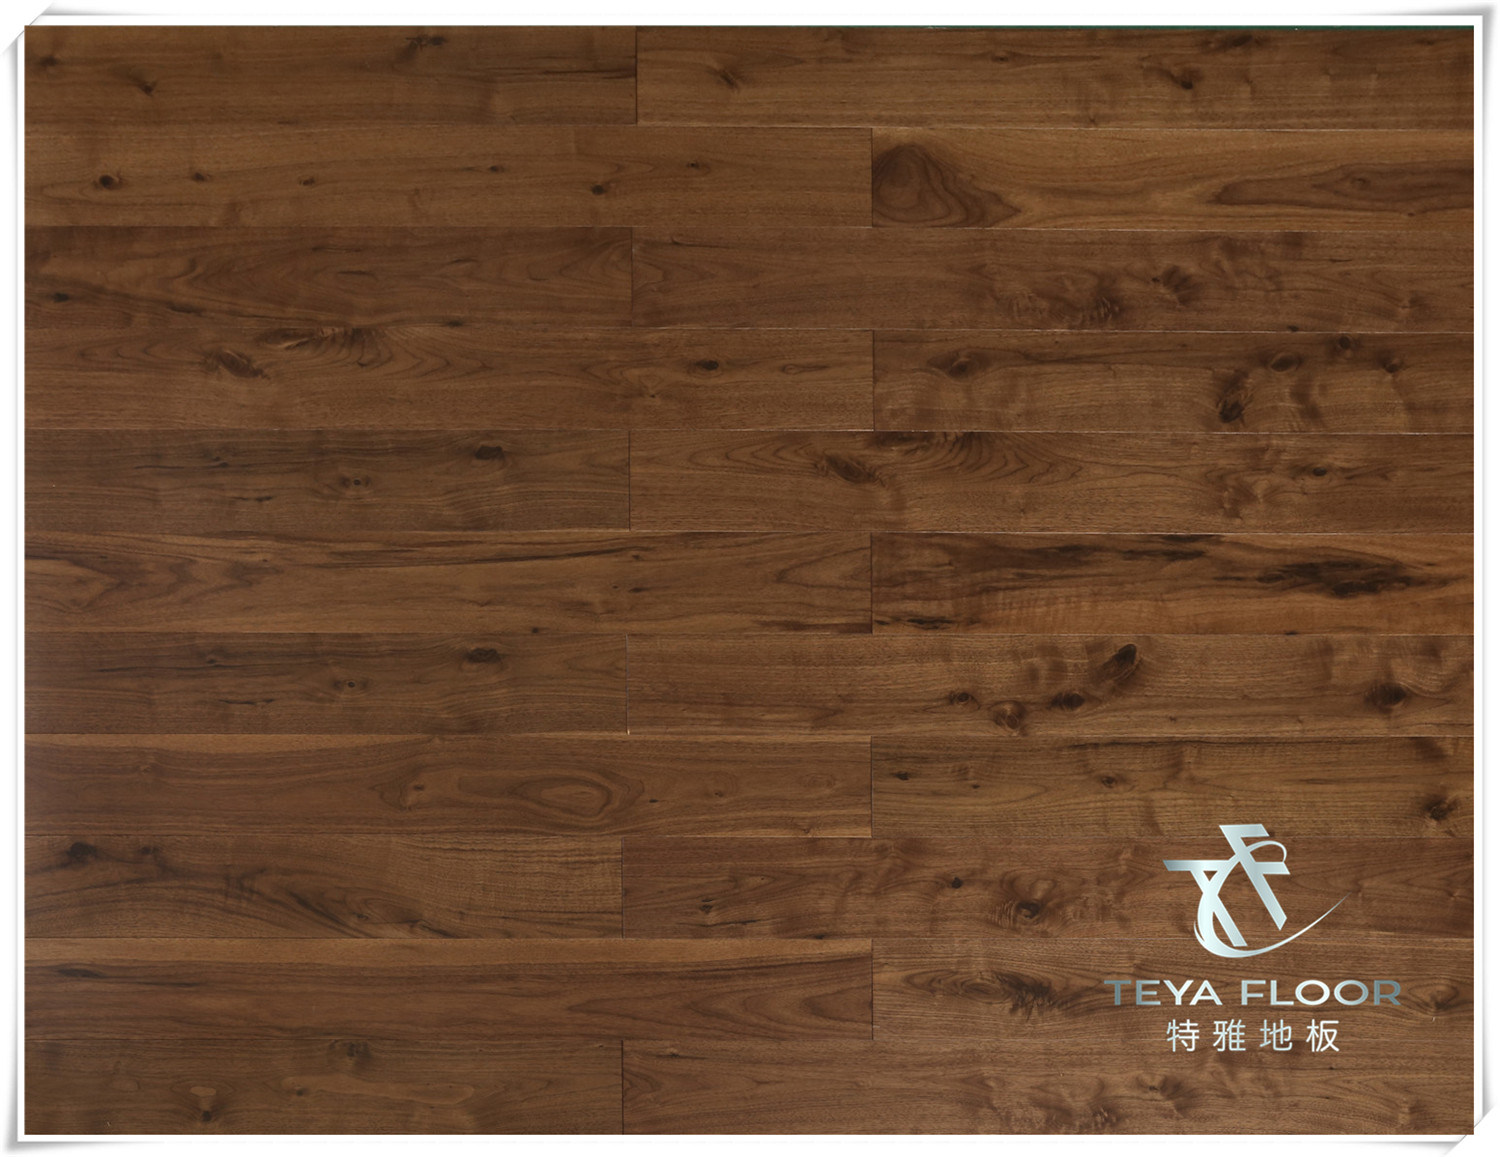 American Walnut Solid Wood Flooring Stained Color